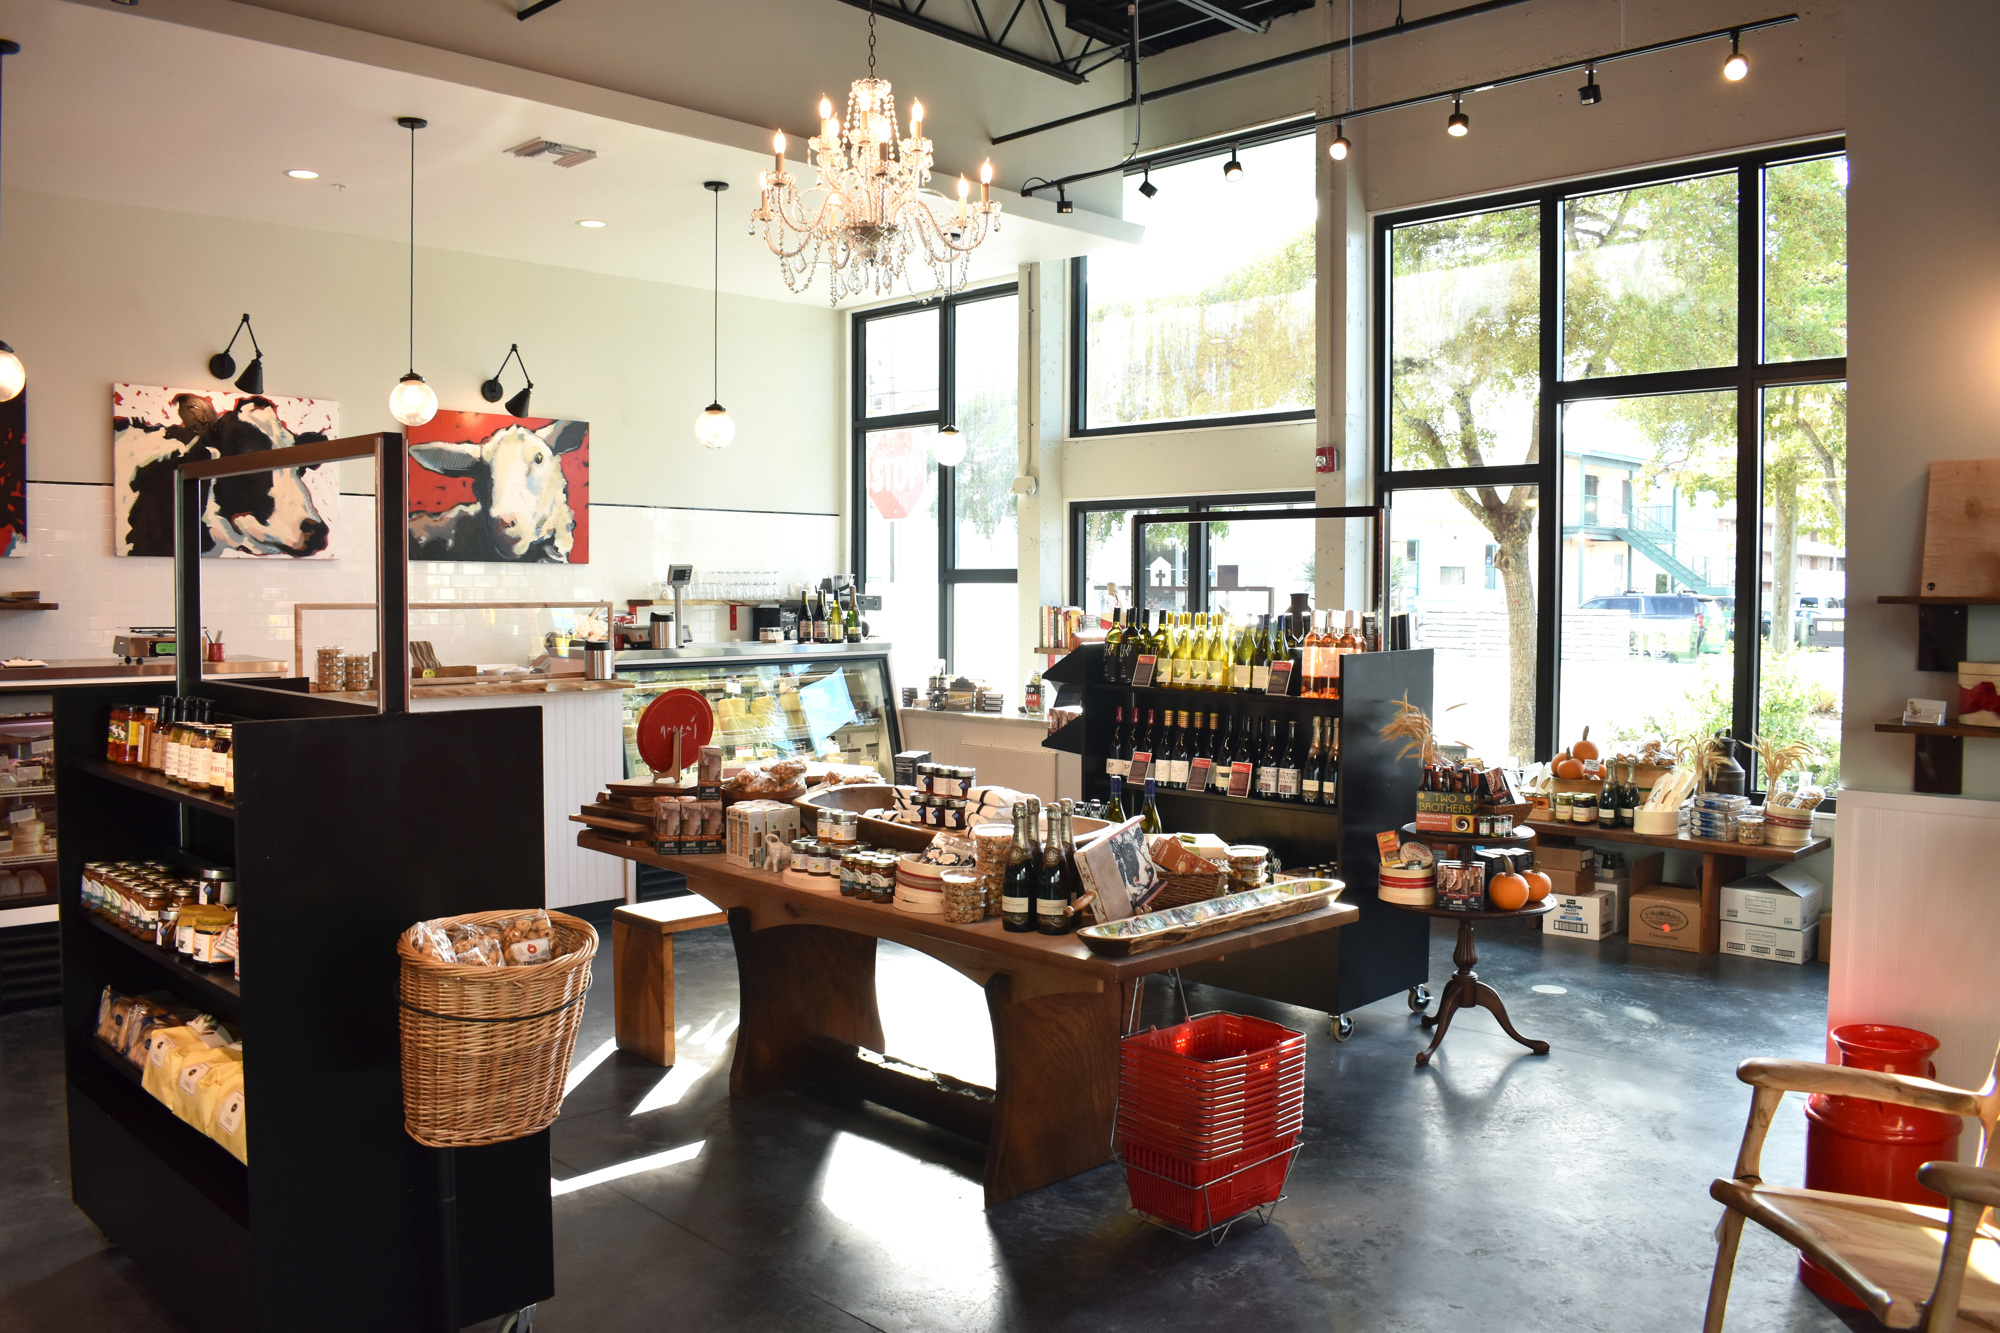 The new shop is located in the Rosemary District's Rosemary Square development. Photo by Niki Kottmann